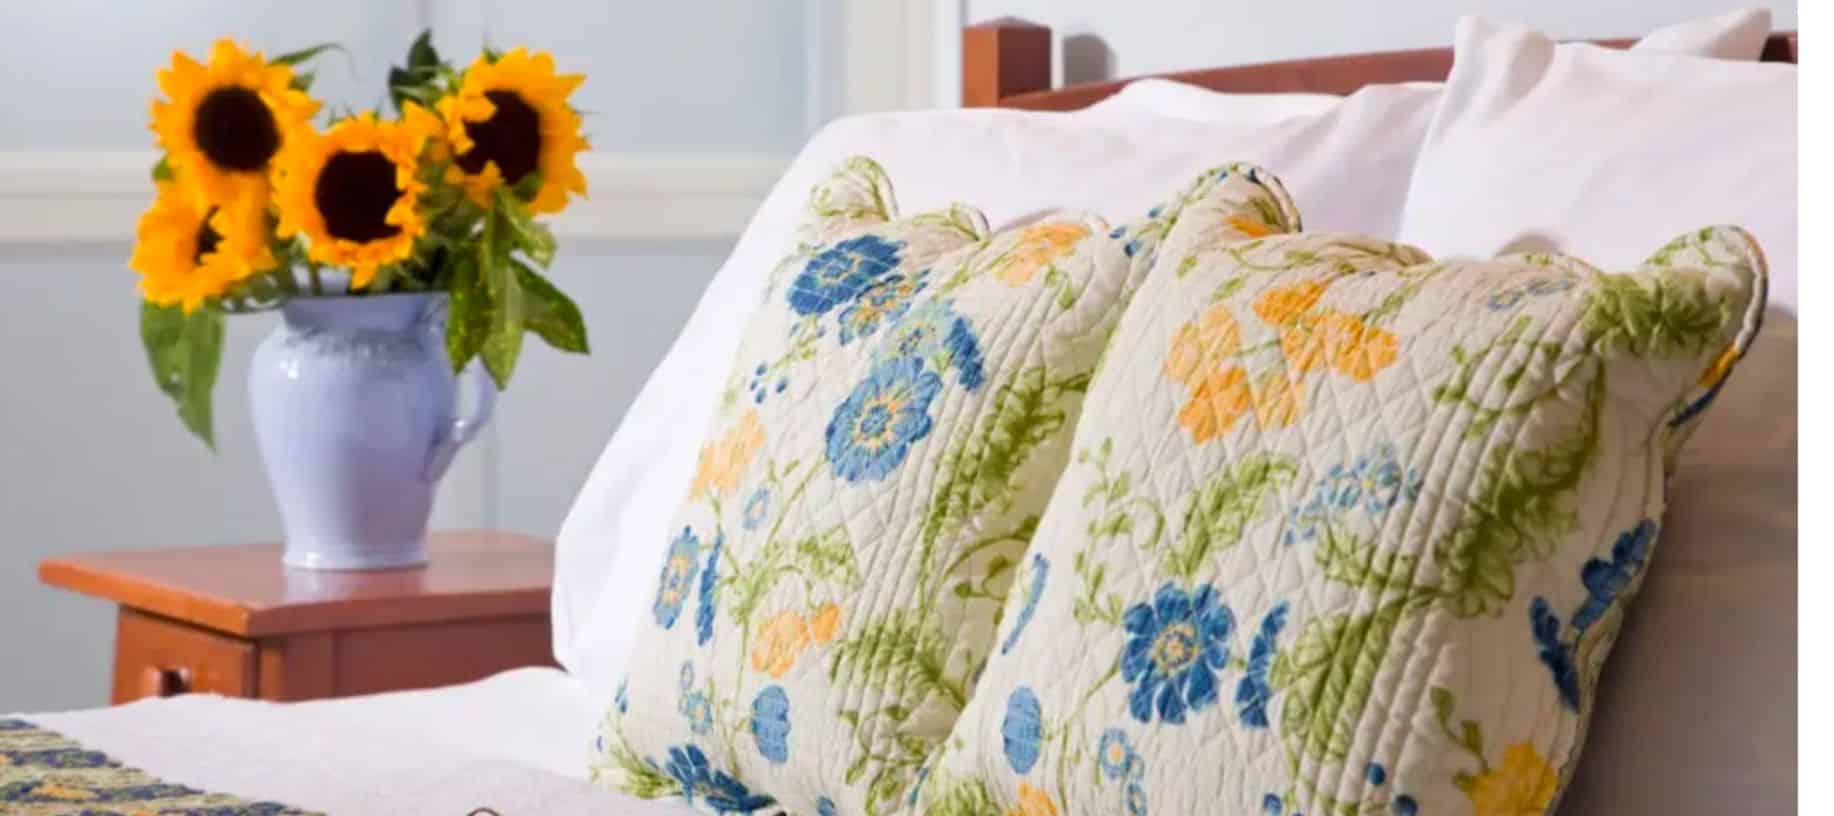 Guest bed with yellow and blue floral bedding, plump pillows and fresh sunflowers